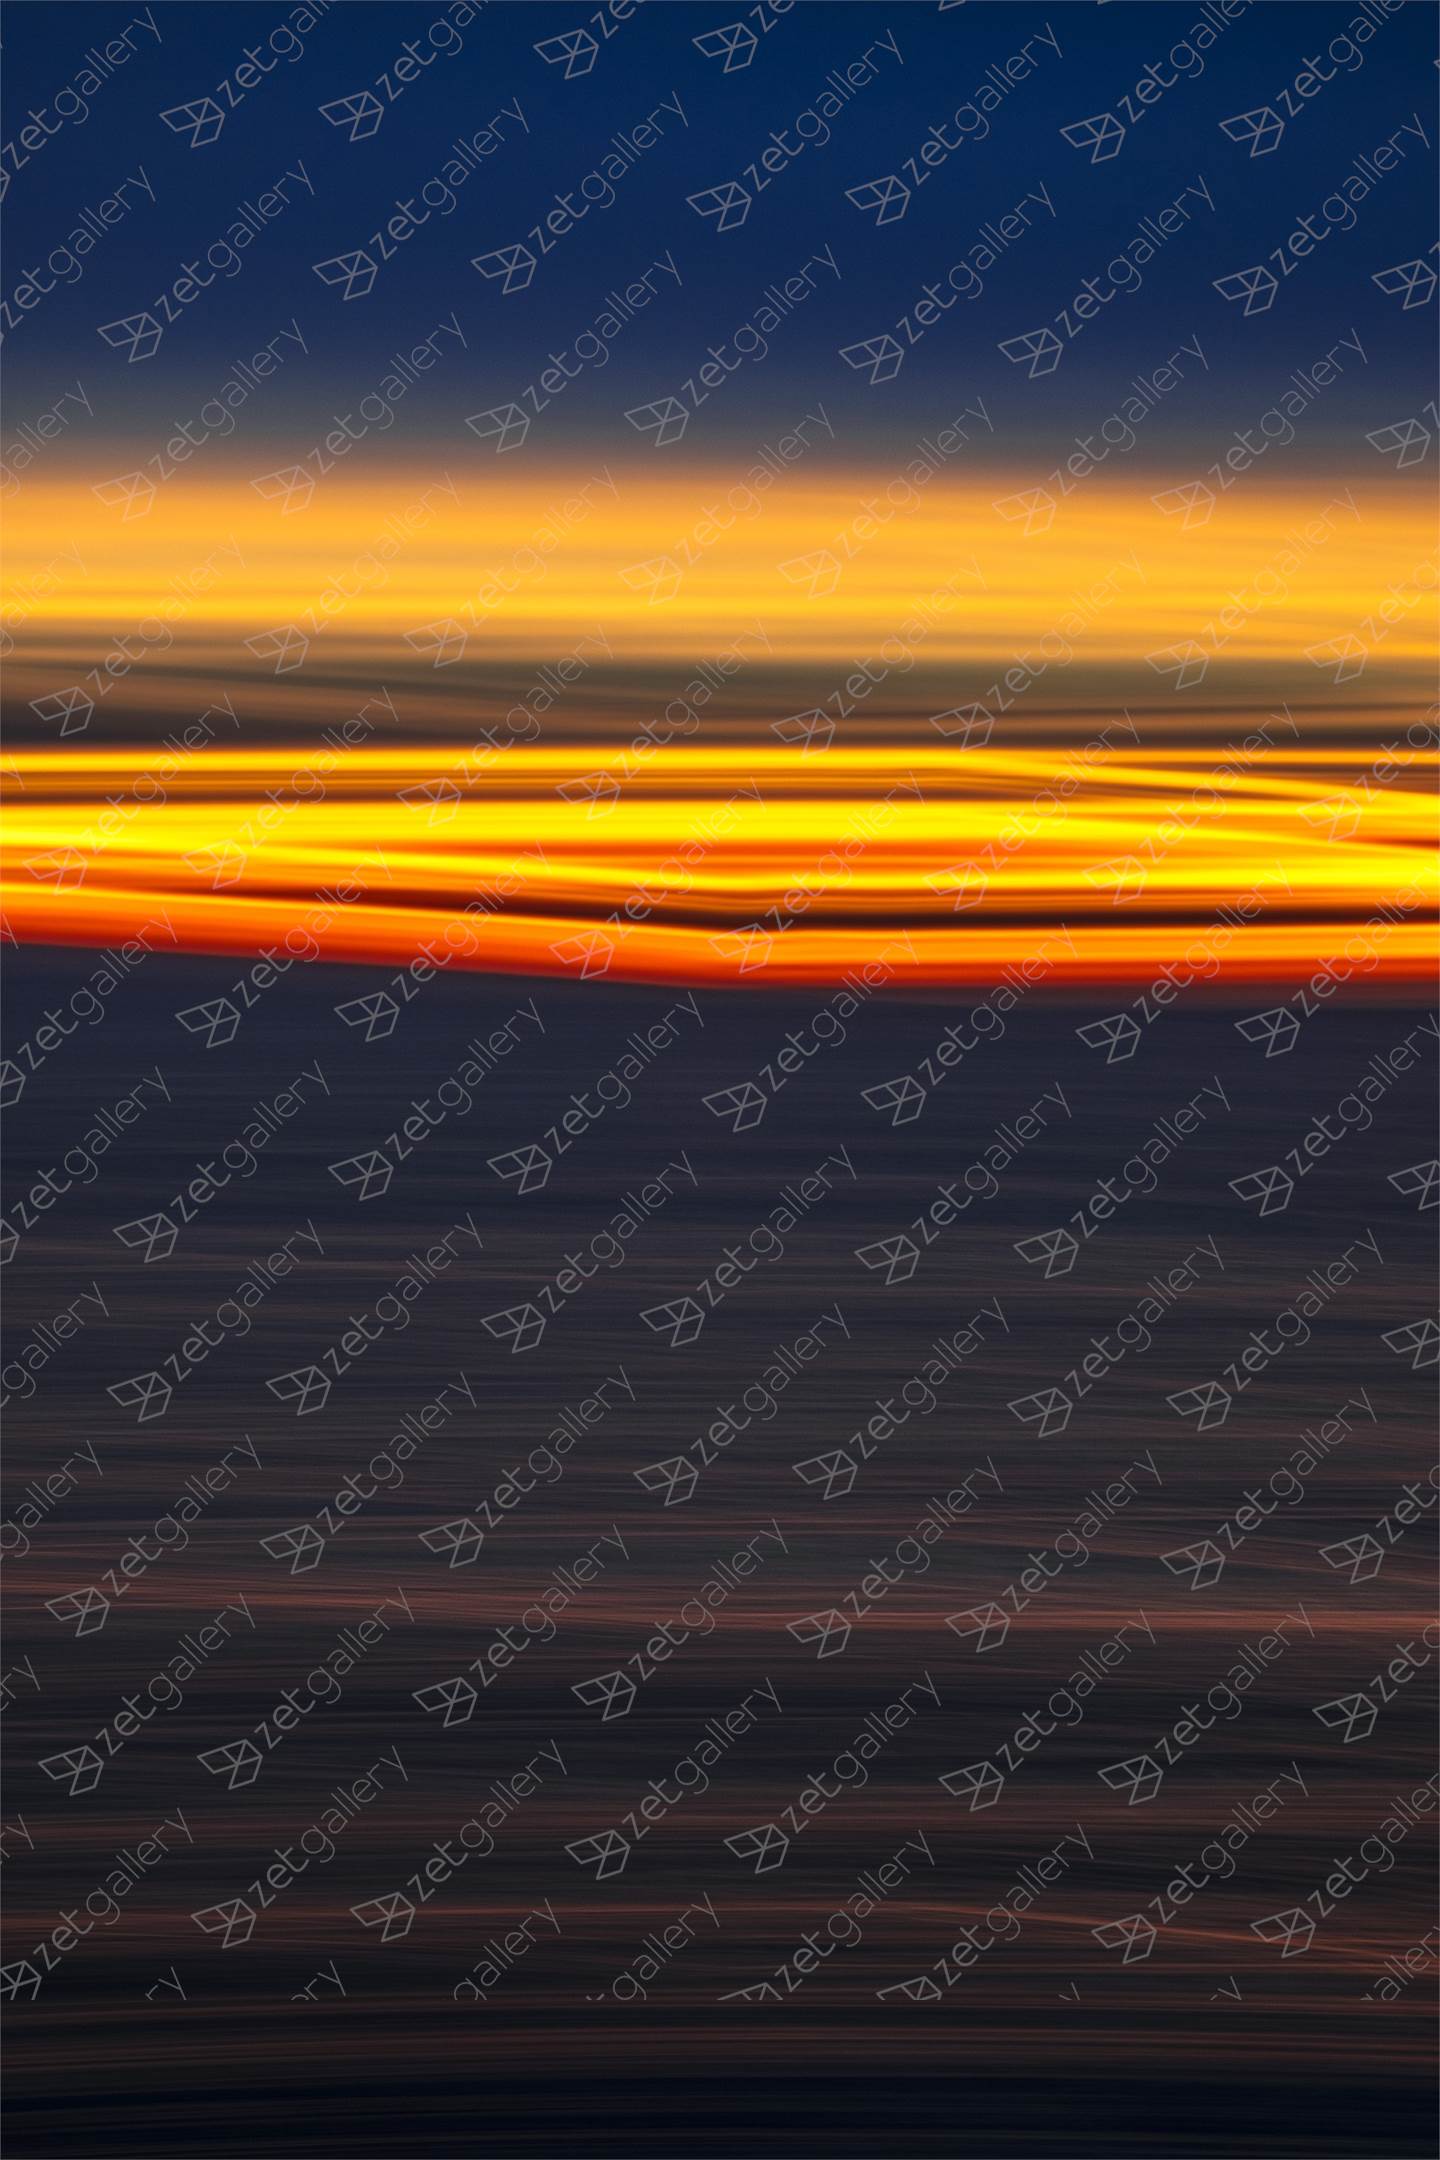 ABSTRACT SUNRISE II, Extra-Large Edition 1 of 3, original Abstract Digital Photography by Benjamin Lurie